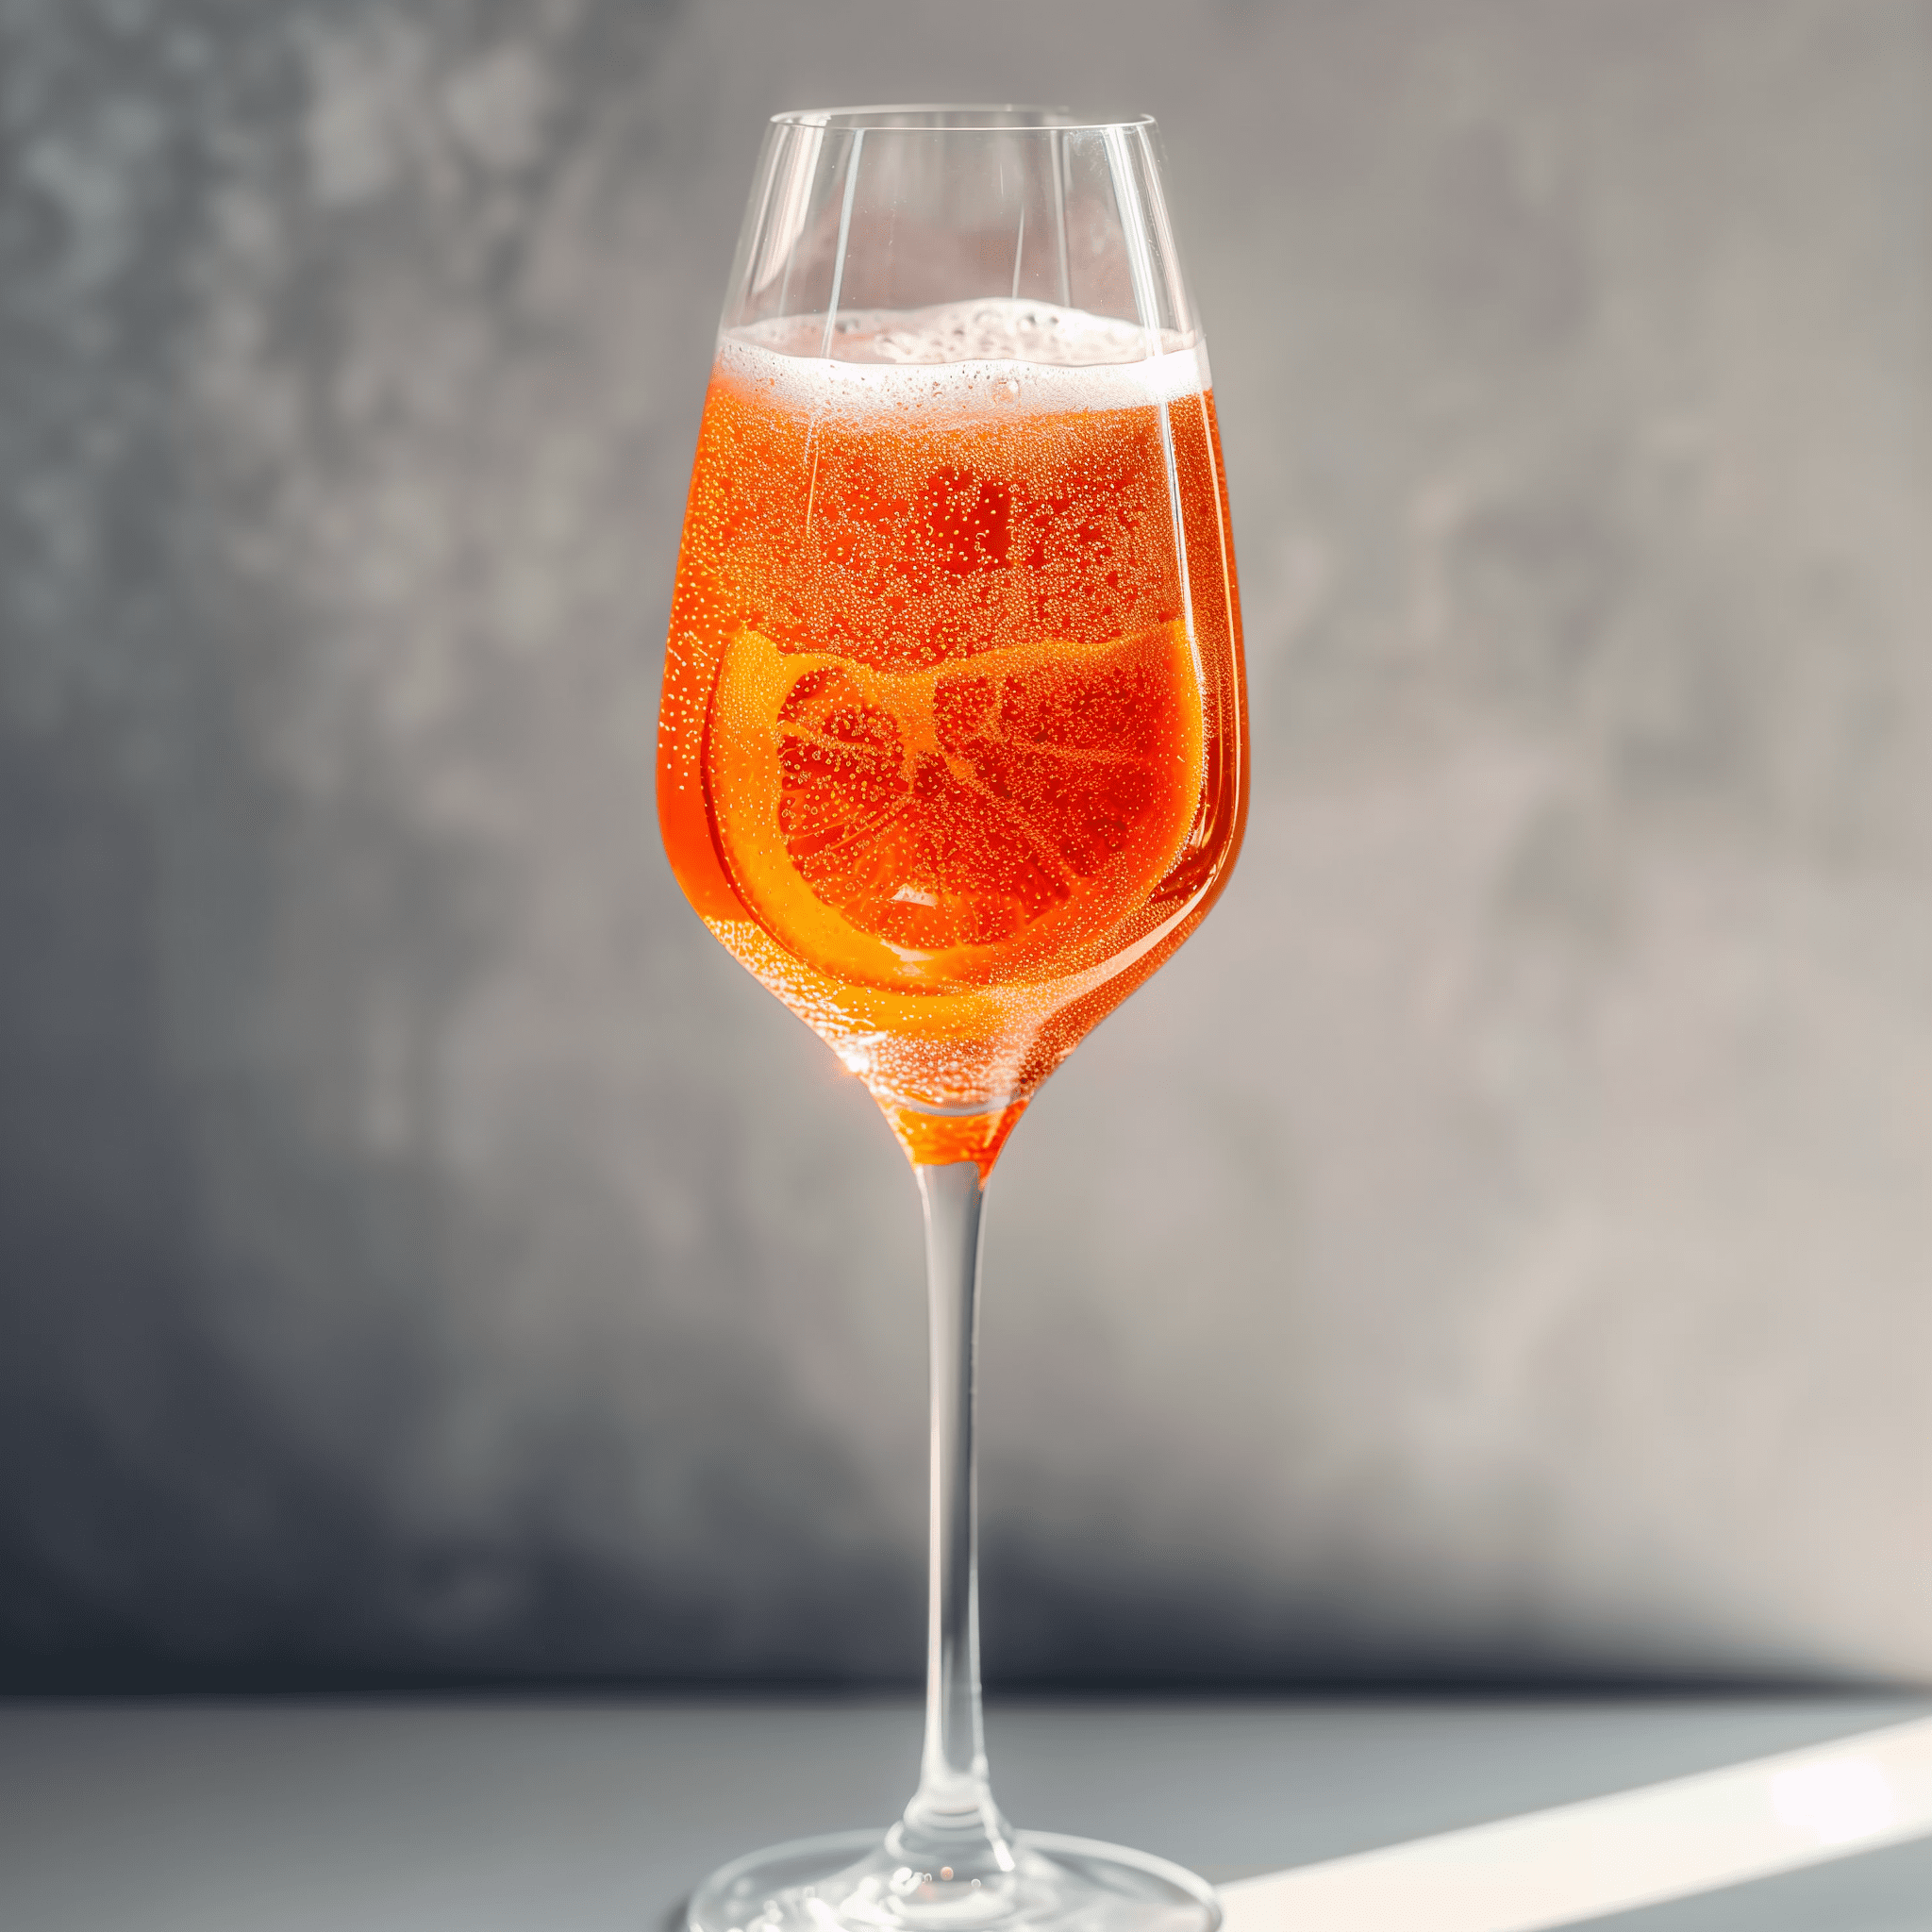 Colletti Royale Cocktail Recipe - The Colletti Royale is a harmonious blend of sweet and sour, with the reposado tequila providing a smooth, oaky undertone. The Cointreau and St-Germain offer sweet floral notes, while the blood orange and lime juices add a refreshing citrus kick. The effervescence of the rosé Champagne brings a light and celebratory finish to the palate.